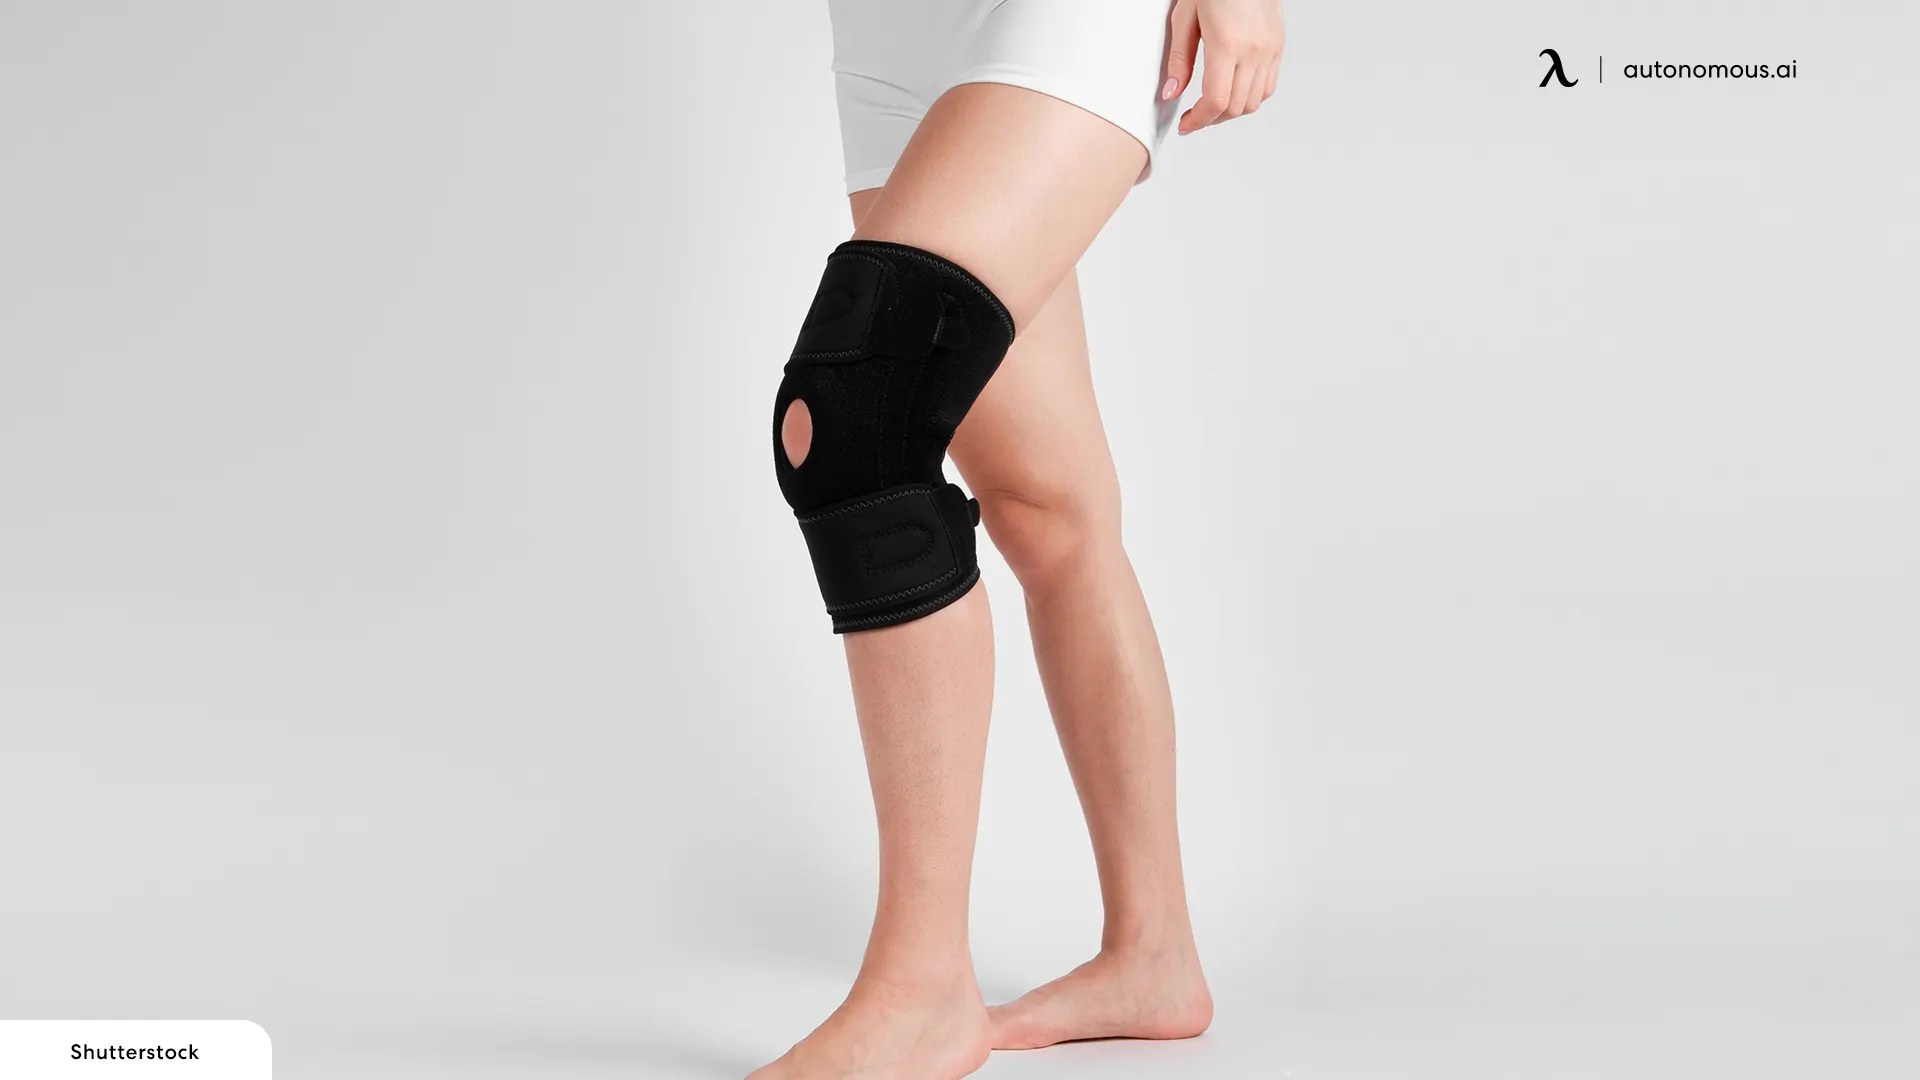 Treatments for Thigh Pain